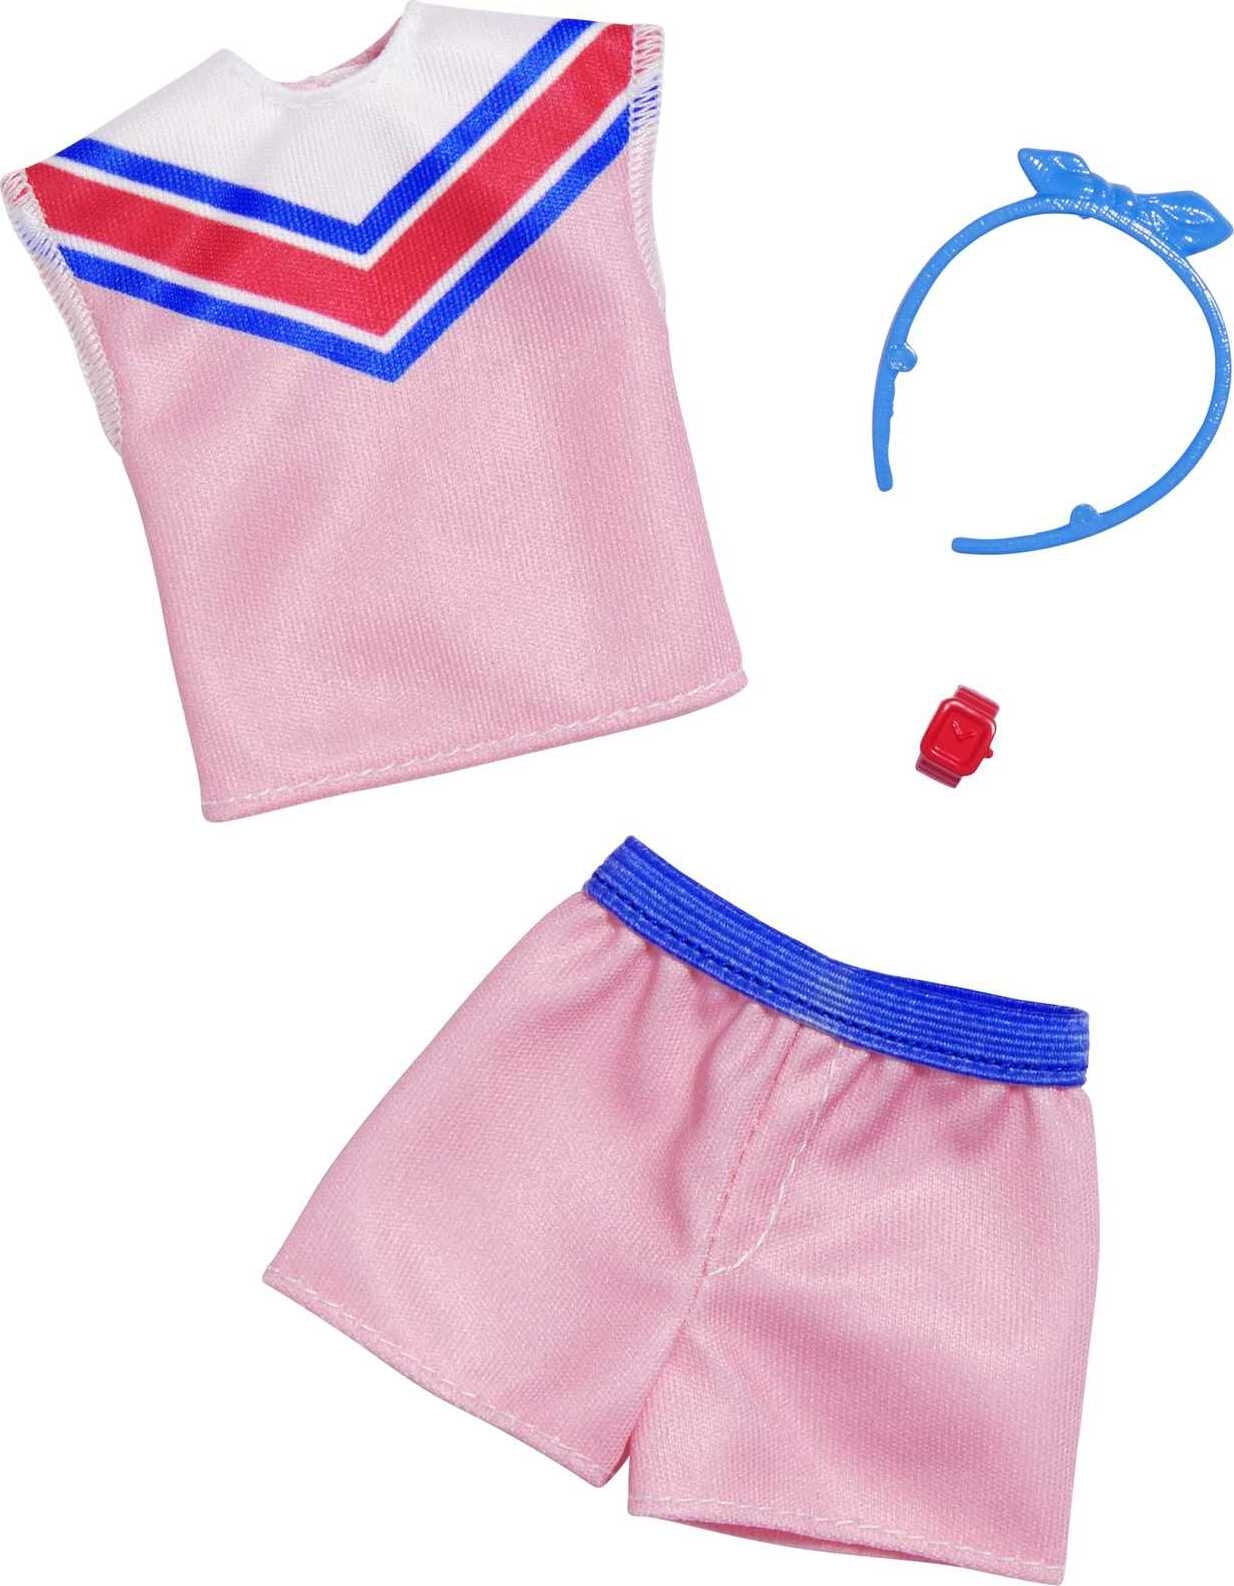 Barbie Fashions Doll Clothes with Sporty Shirt & Pink Shorts with 2 Accessories (1 Outfit)